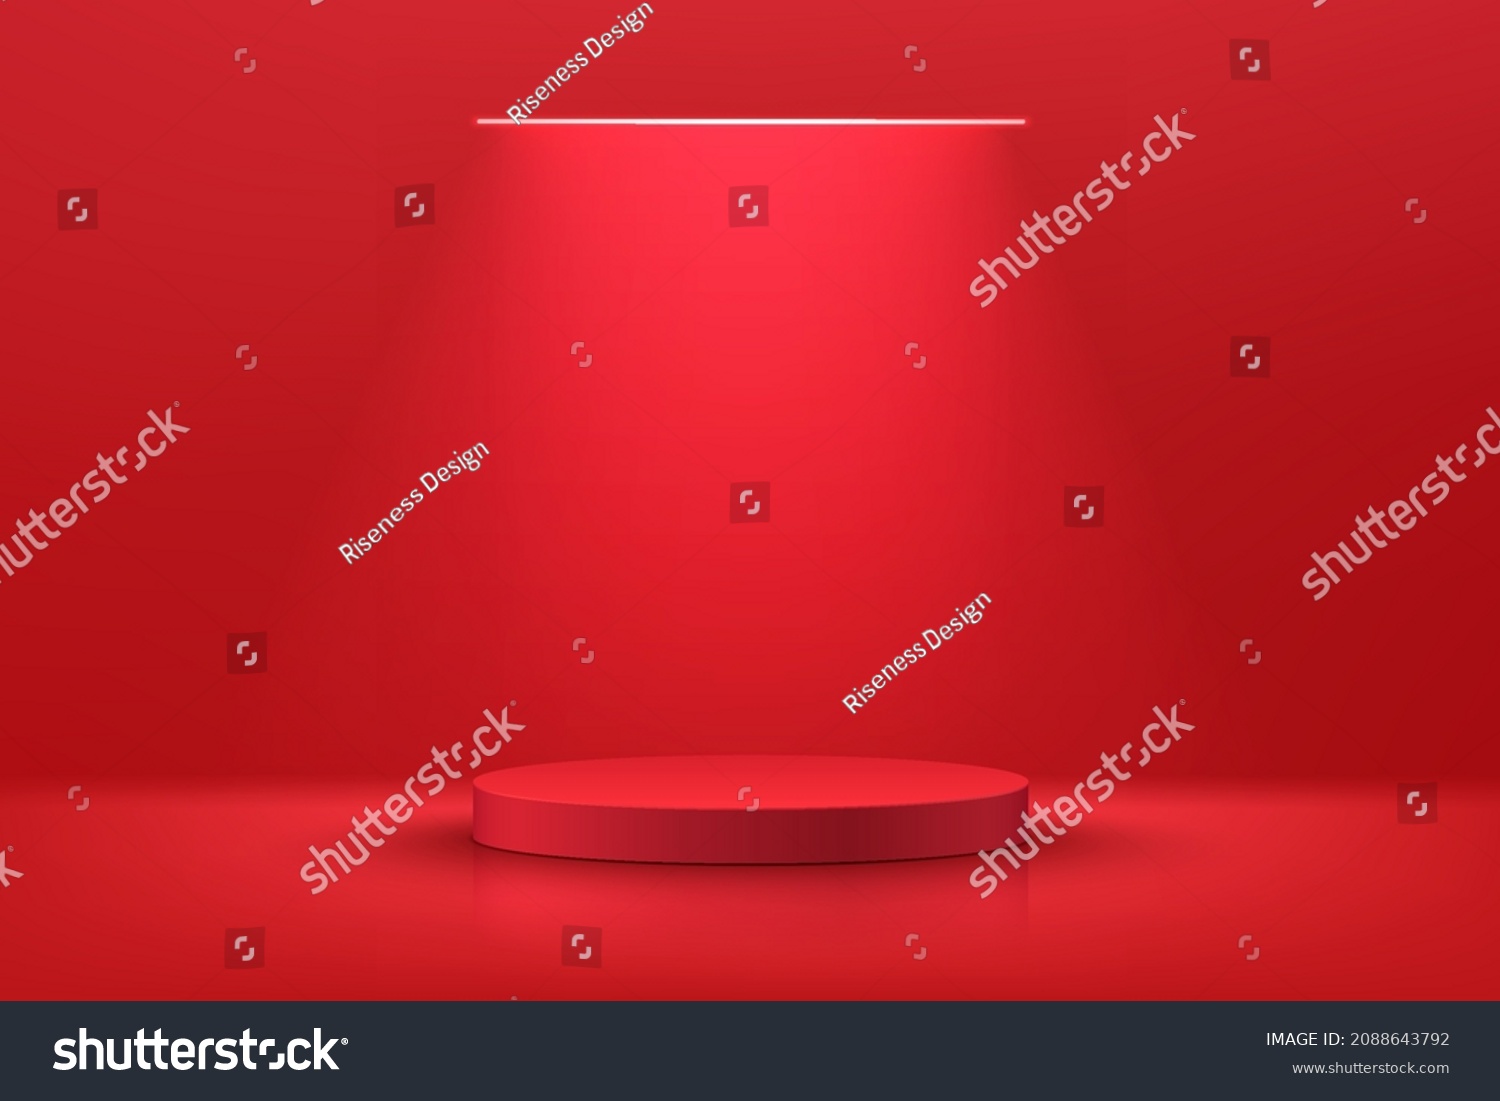 Abstract realistic 3D red cylinder pedestal or podium with illuminate horizontal neon lamp. Dark red minimal scene for product display presentation. Vector rendering geometric platform design. #2088643792